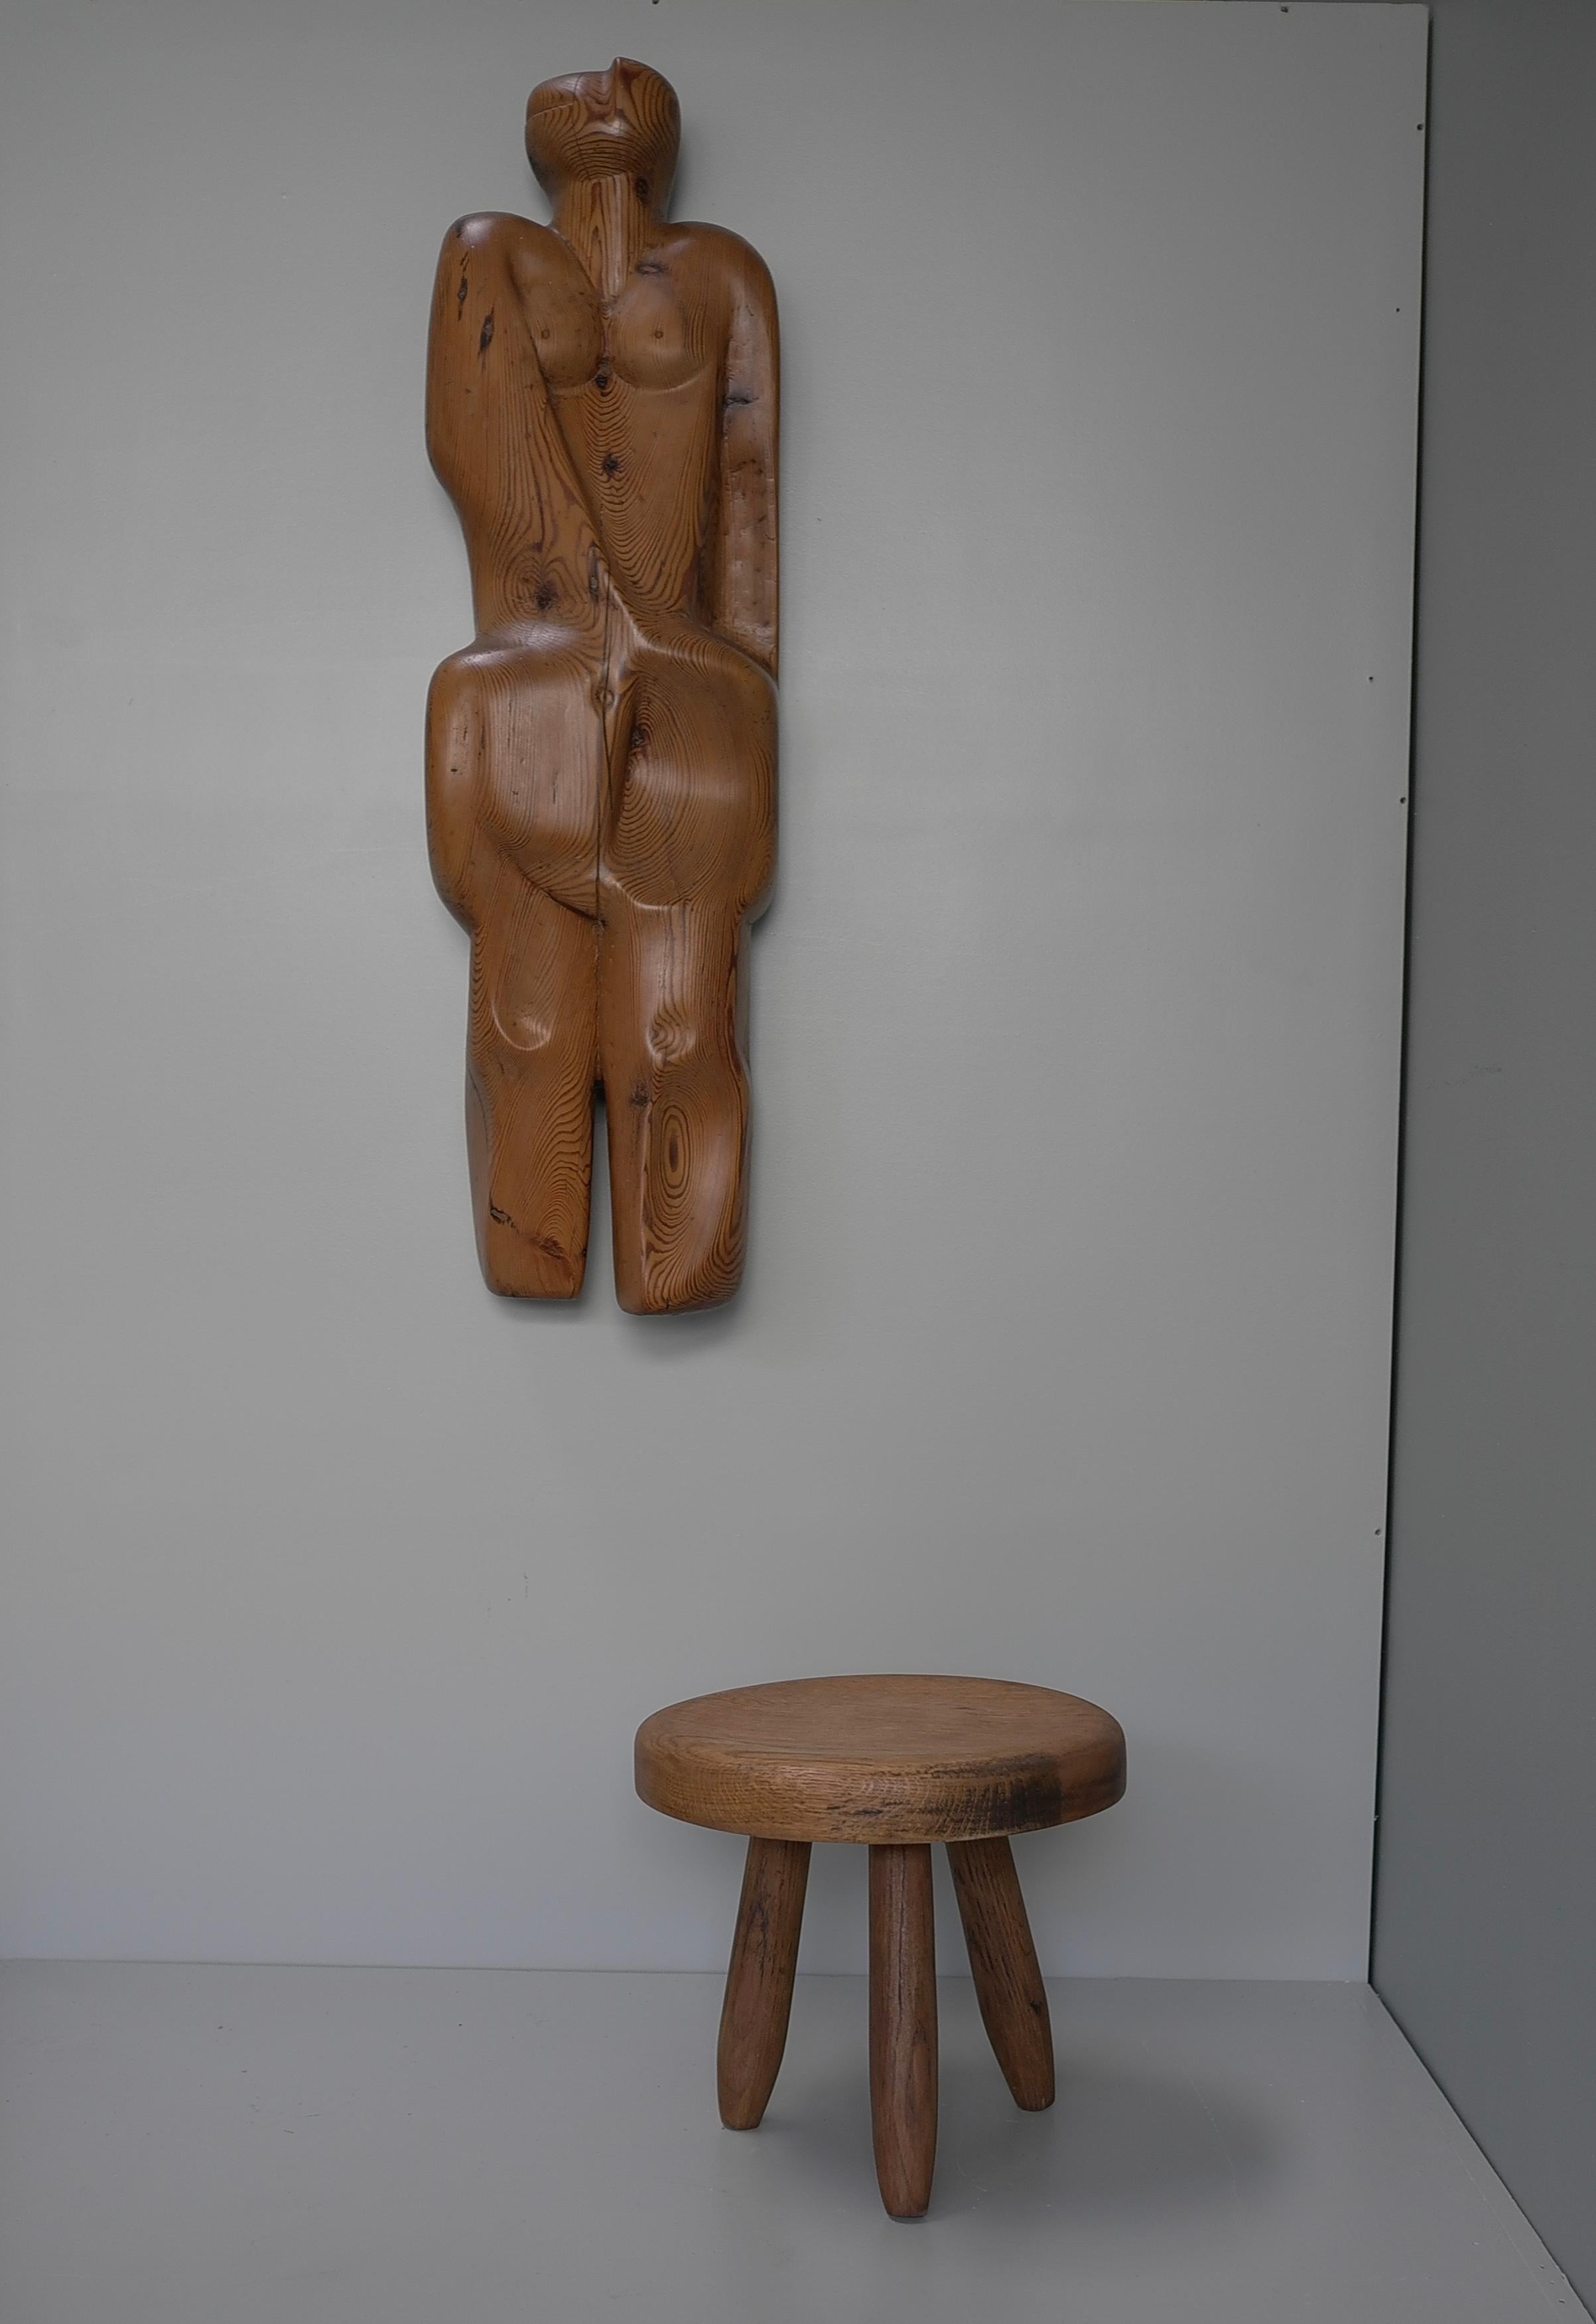 Mid-Century Modern Abstract Wooden Wall Art , Women Figure by Cor Dam, Delft The Netherlands 1958 For Sale